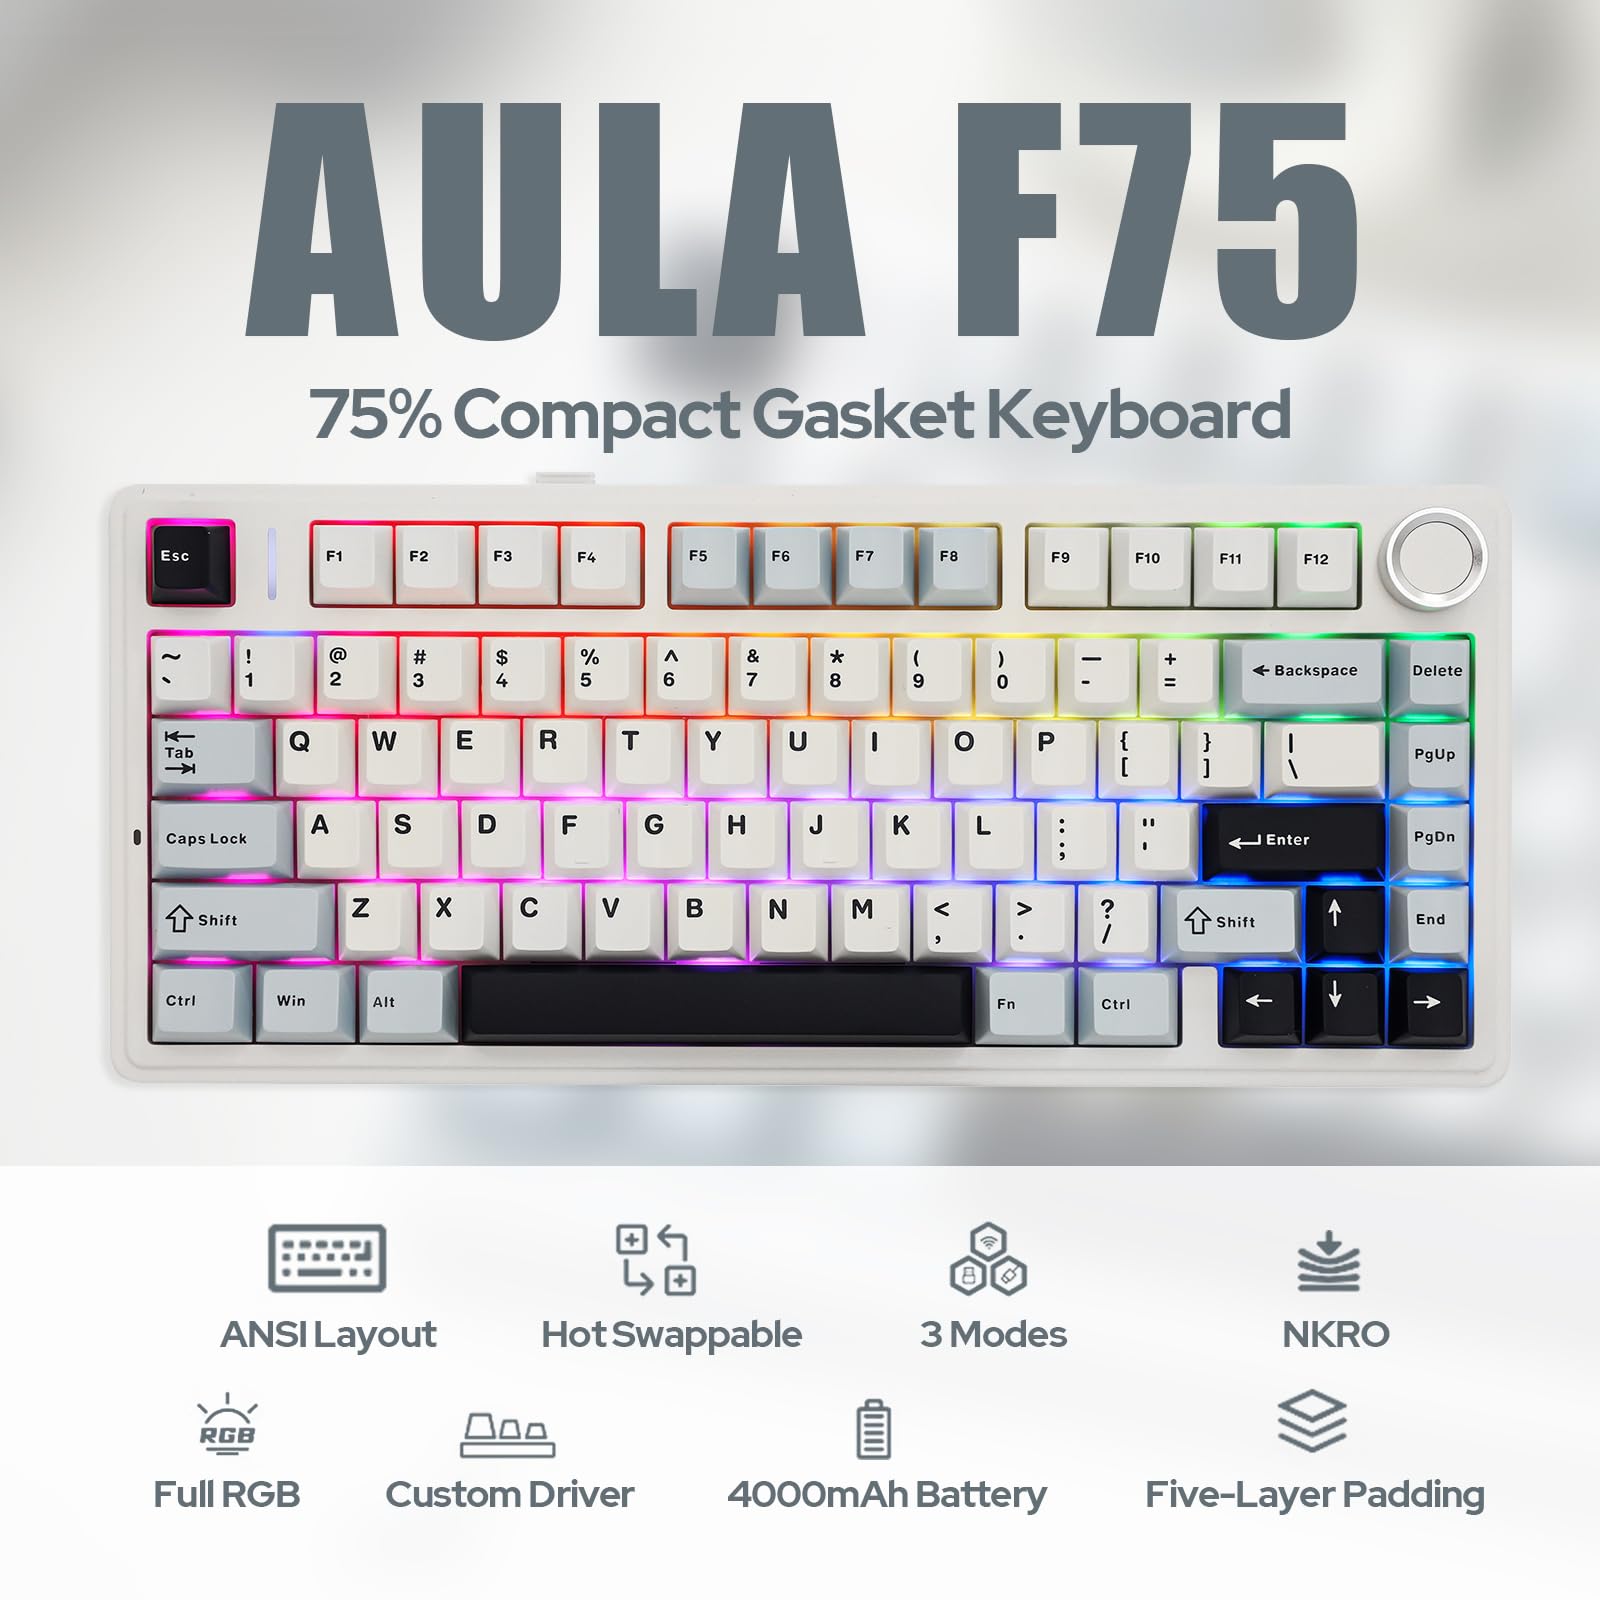 EPOMAKER x Aula F75 Gasket Mechanical Keyboard, 75% Wireless Hot Swappable Gaming Keyboard with Five-Layer Padding&Knob, Bluetooth/2.4GHz/USB-C, RGB (Light Blue, Ice Vein Switch)